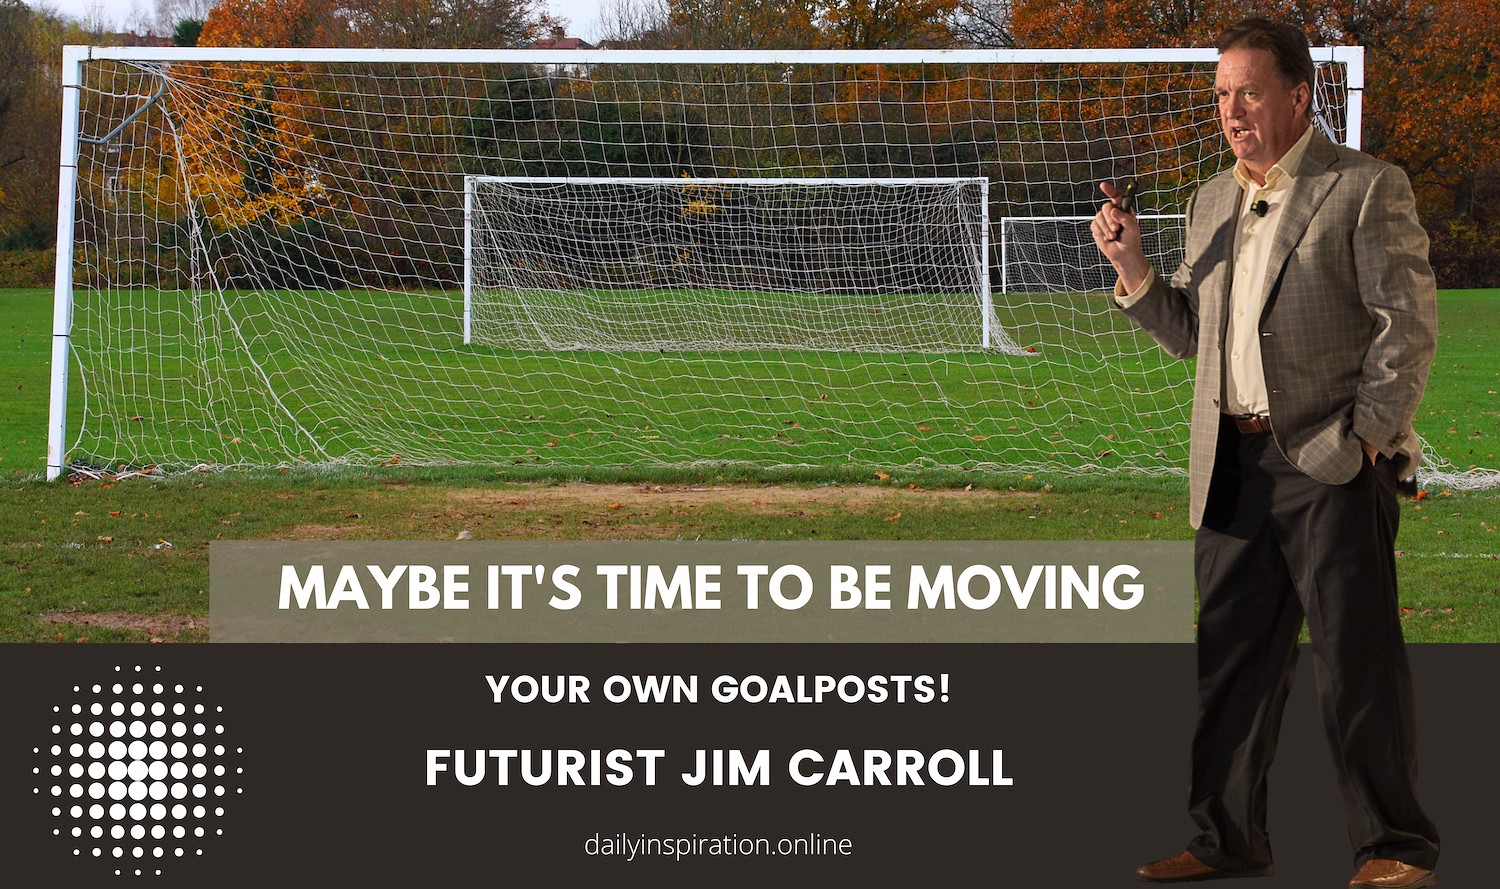 "Maybe it's time to be moving your own goalposts!" - Futurist Jim Carroll